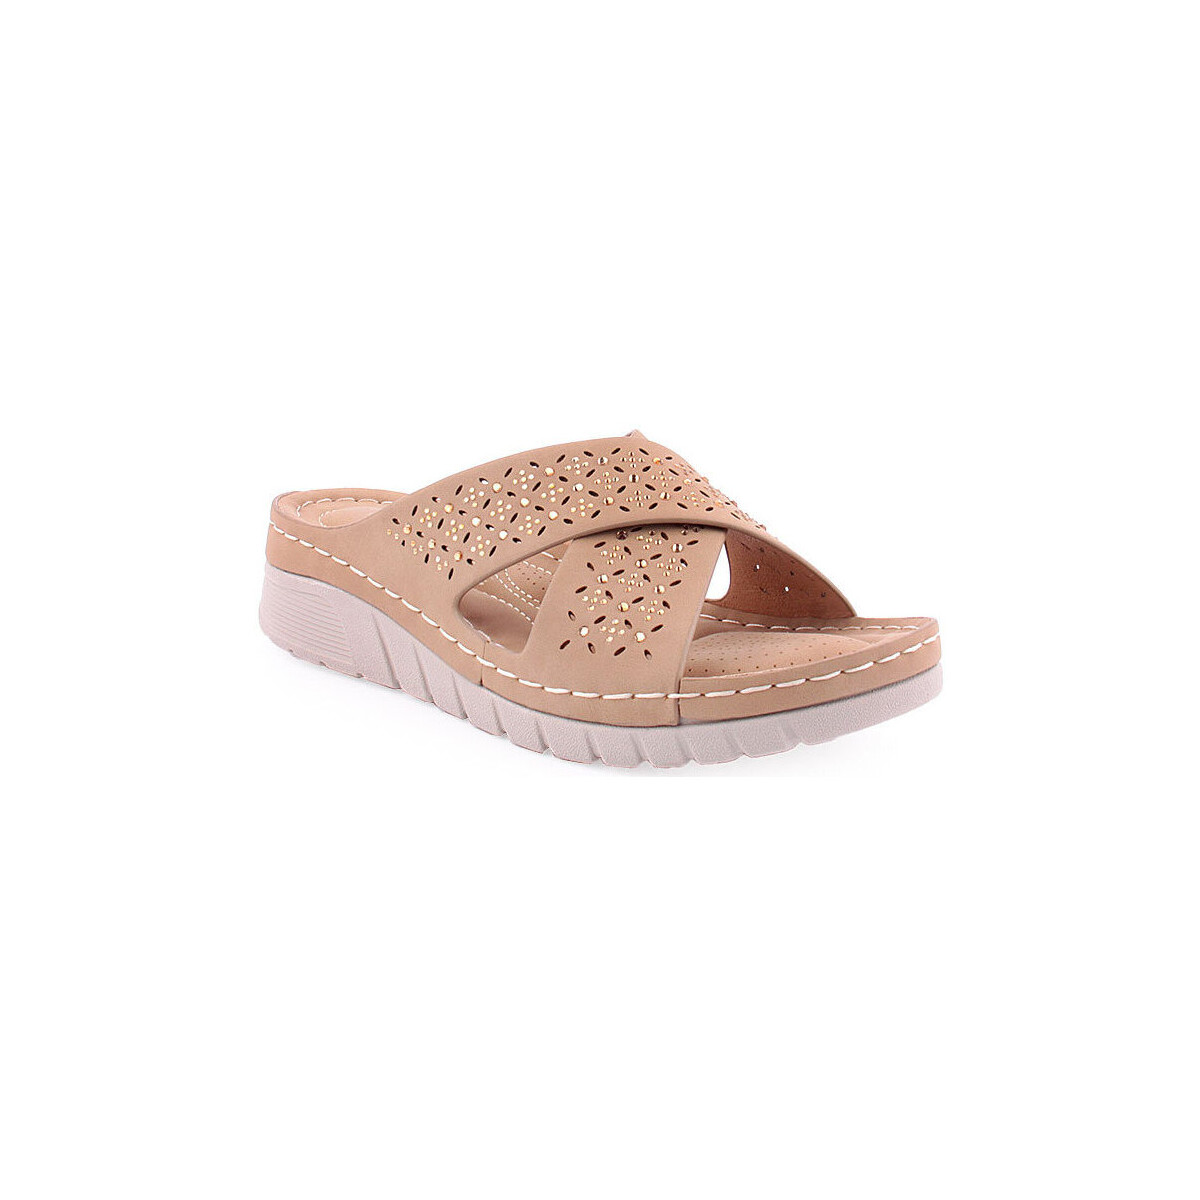 Sapatos Mulher Chinelos Lapierce L Slippers Comfort Outros